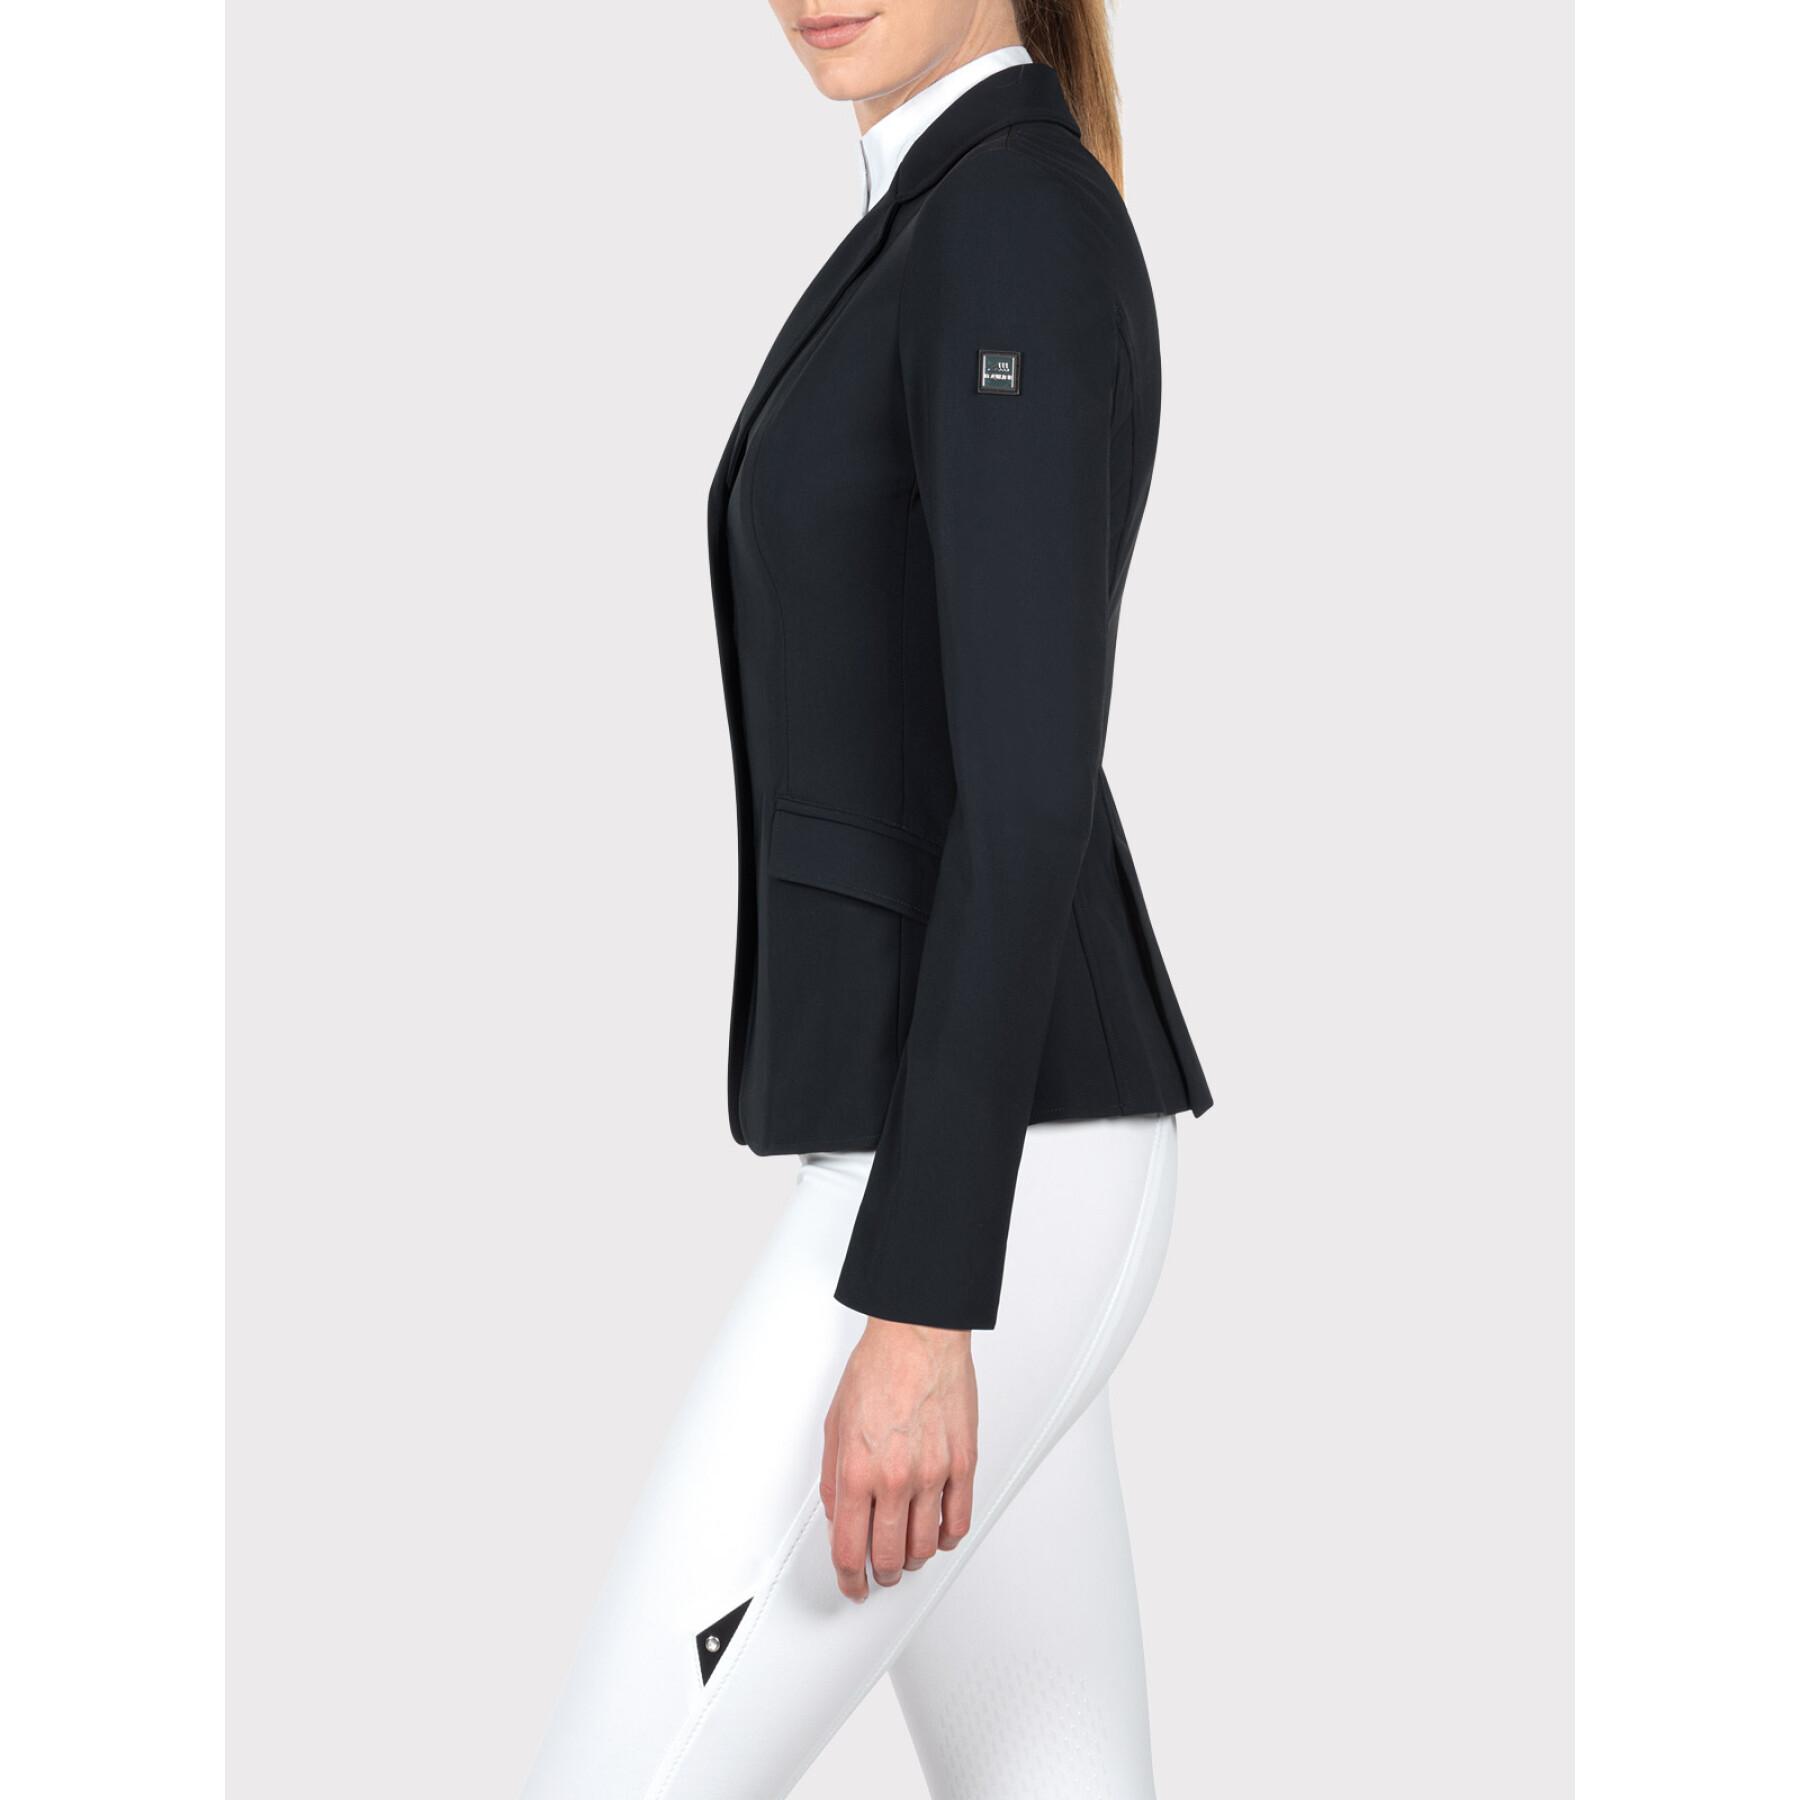 Women's riding competition jacket Equiline Miriamk